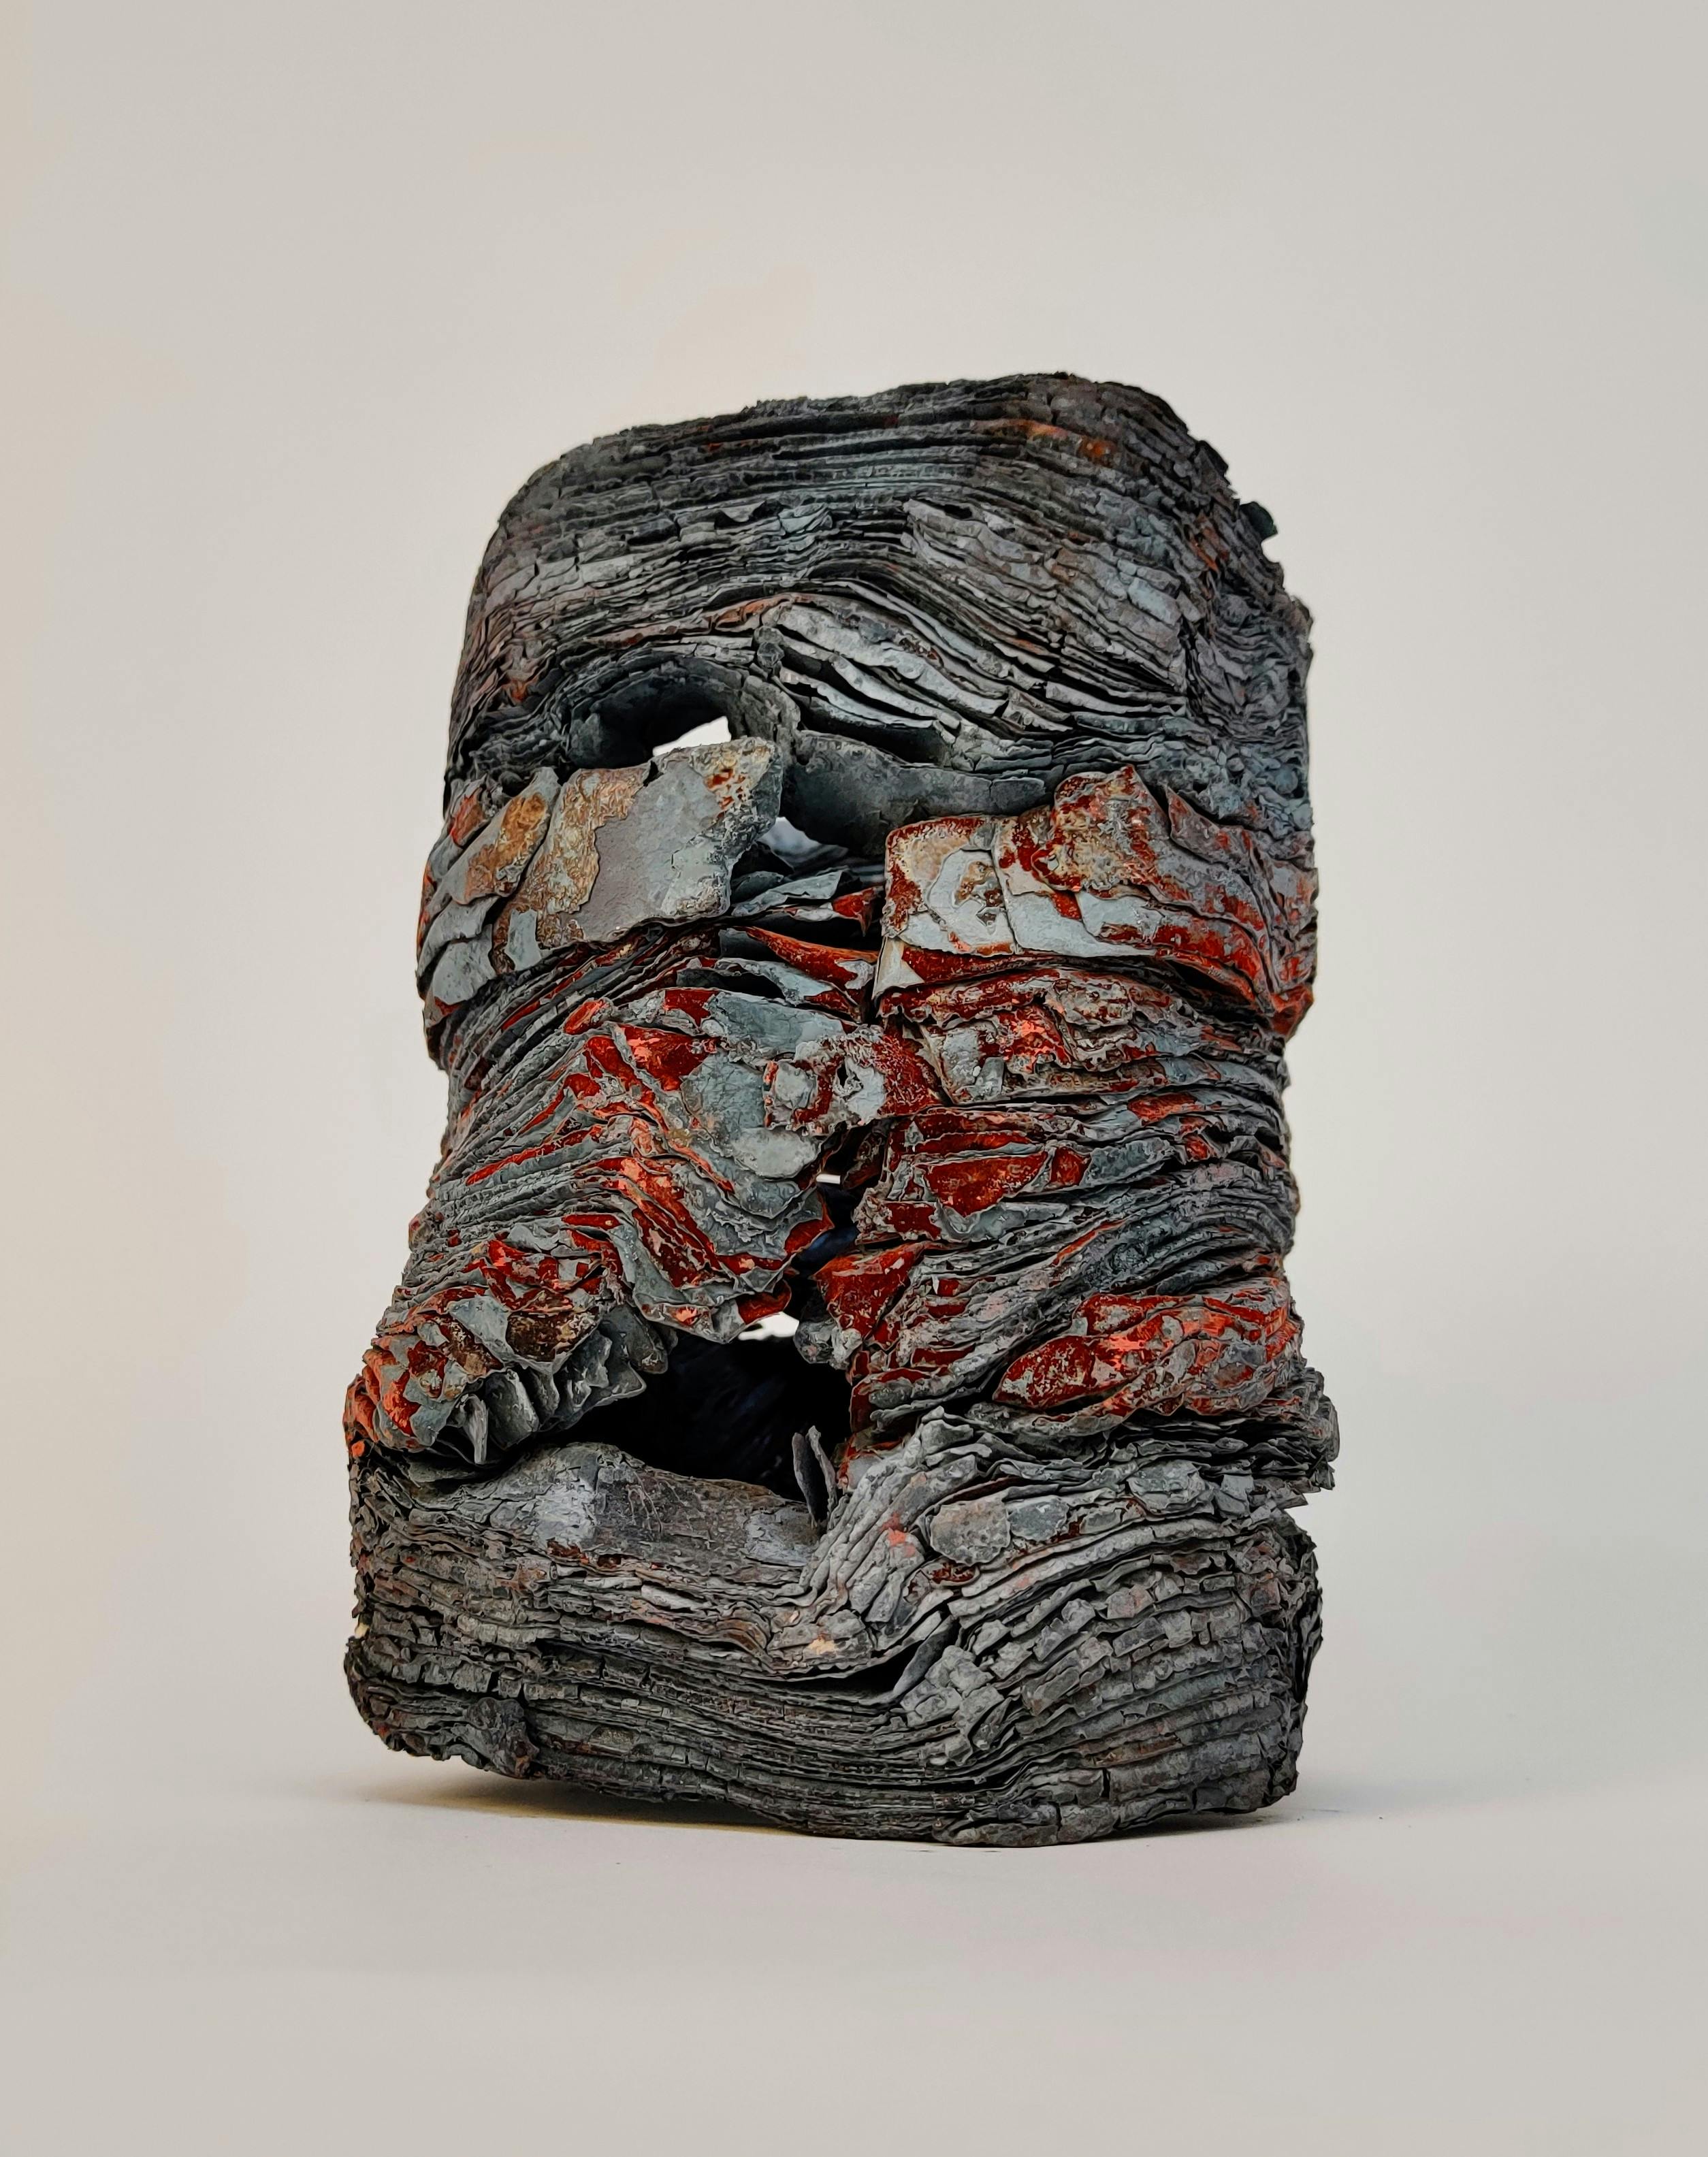 ash colored metal sculpture featuring fine folds and crags with rust accent color reminiscent of leftover coal of a burned log